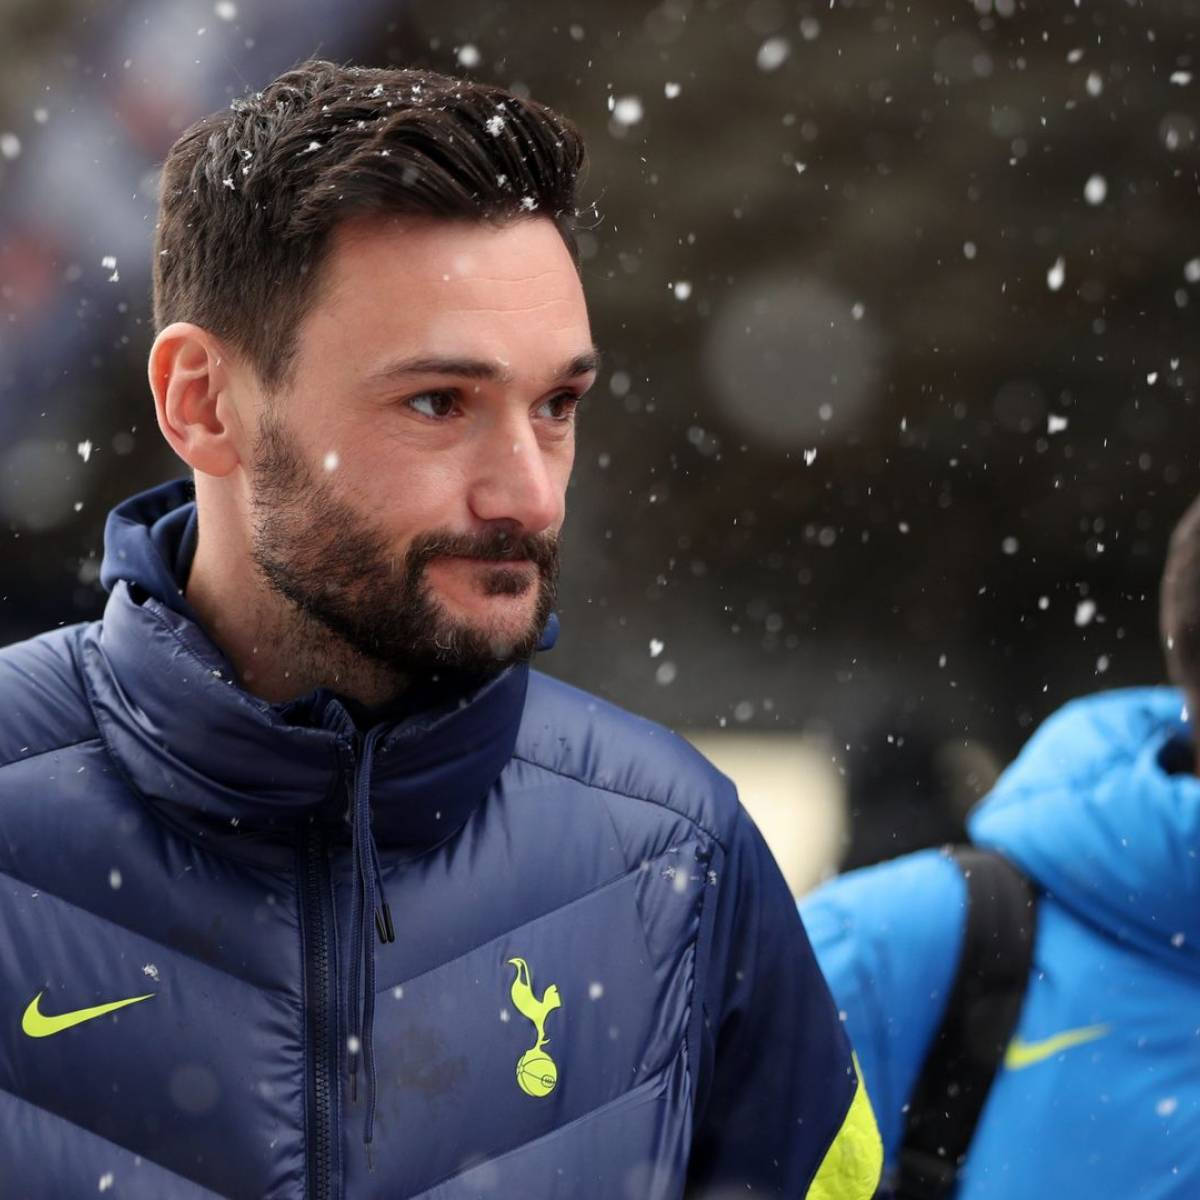 Hugo Lloris - The GoalKeeper Star Standing Confidently on a Snowy Day Wallpaper